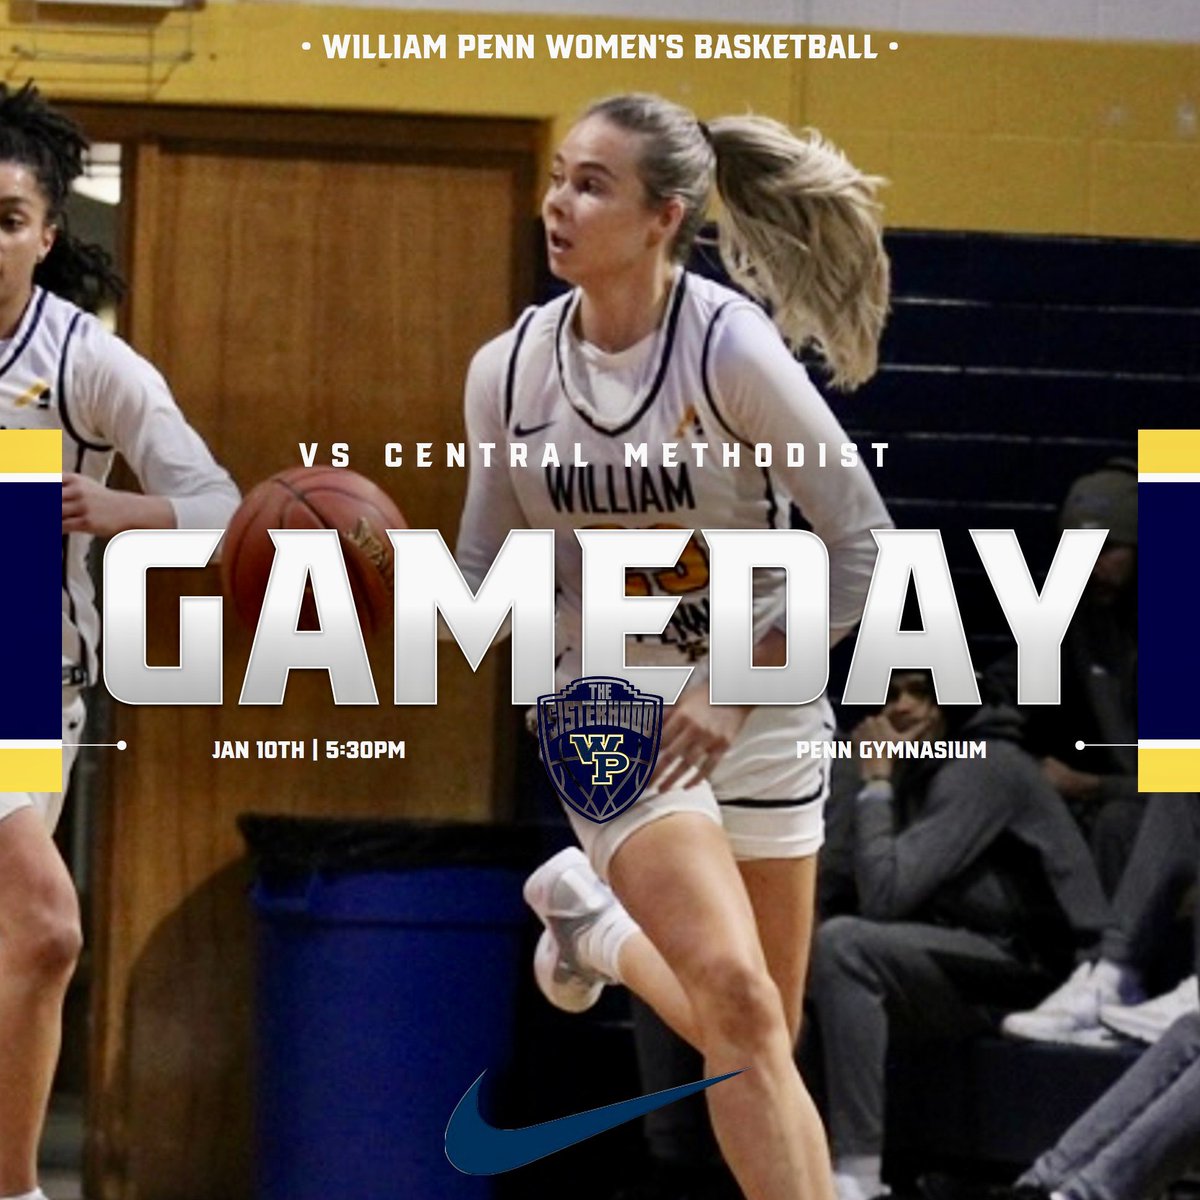 IT’S GAMEDAY!!! Your Statesmen Women’s Basketball team takes in Central Methodist University tonight (1/10/24) at 5:30PM in Penn Gymnasium. If you’re unable to make it in person, you can go to the LINK in our BIO to watch through the Statesmen Sports Network!